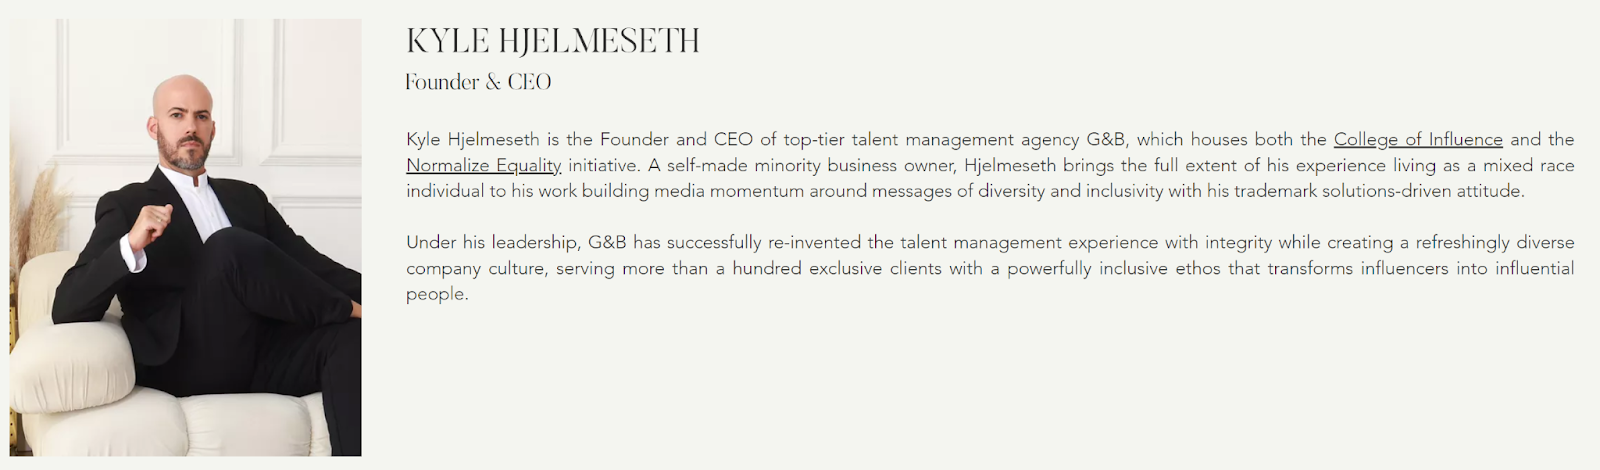 Kyle Hjelmeseth, the CEO of Talent Management at G&B, on Influencer Management & Marketing Mistakes